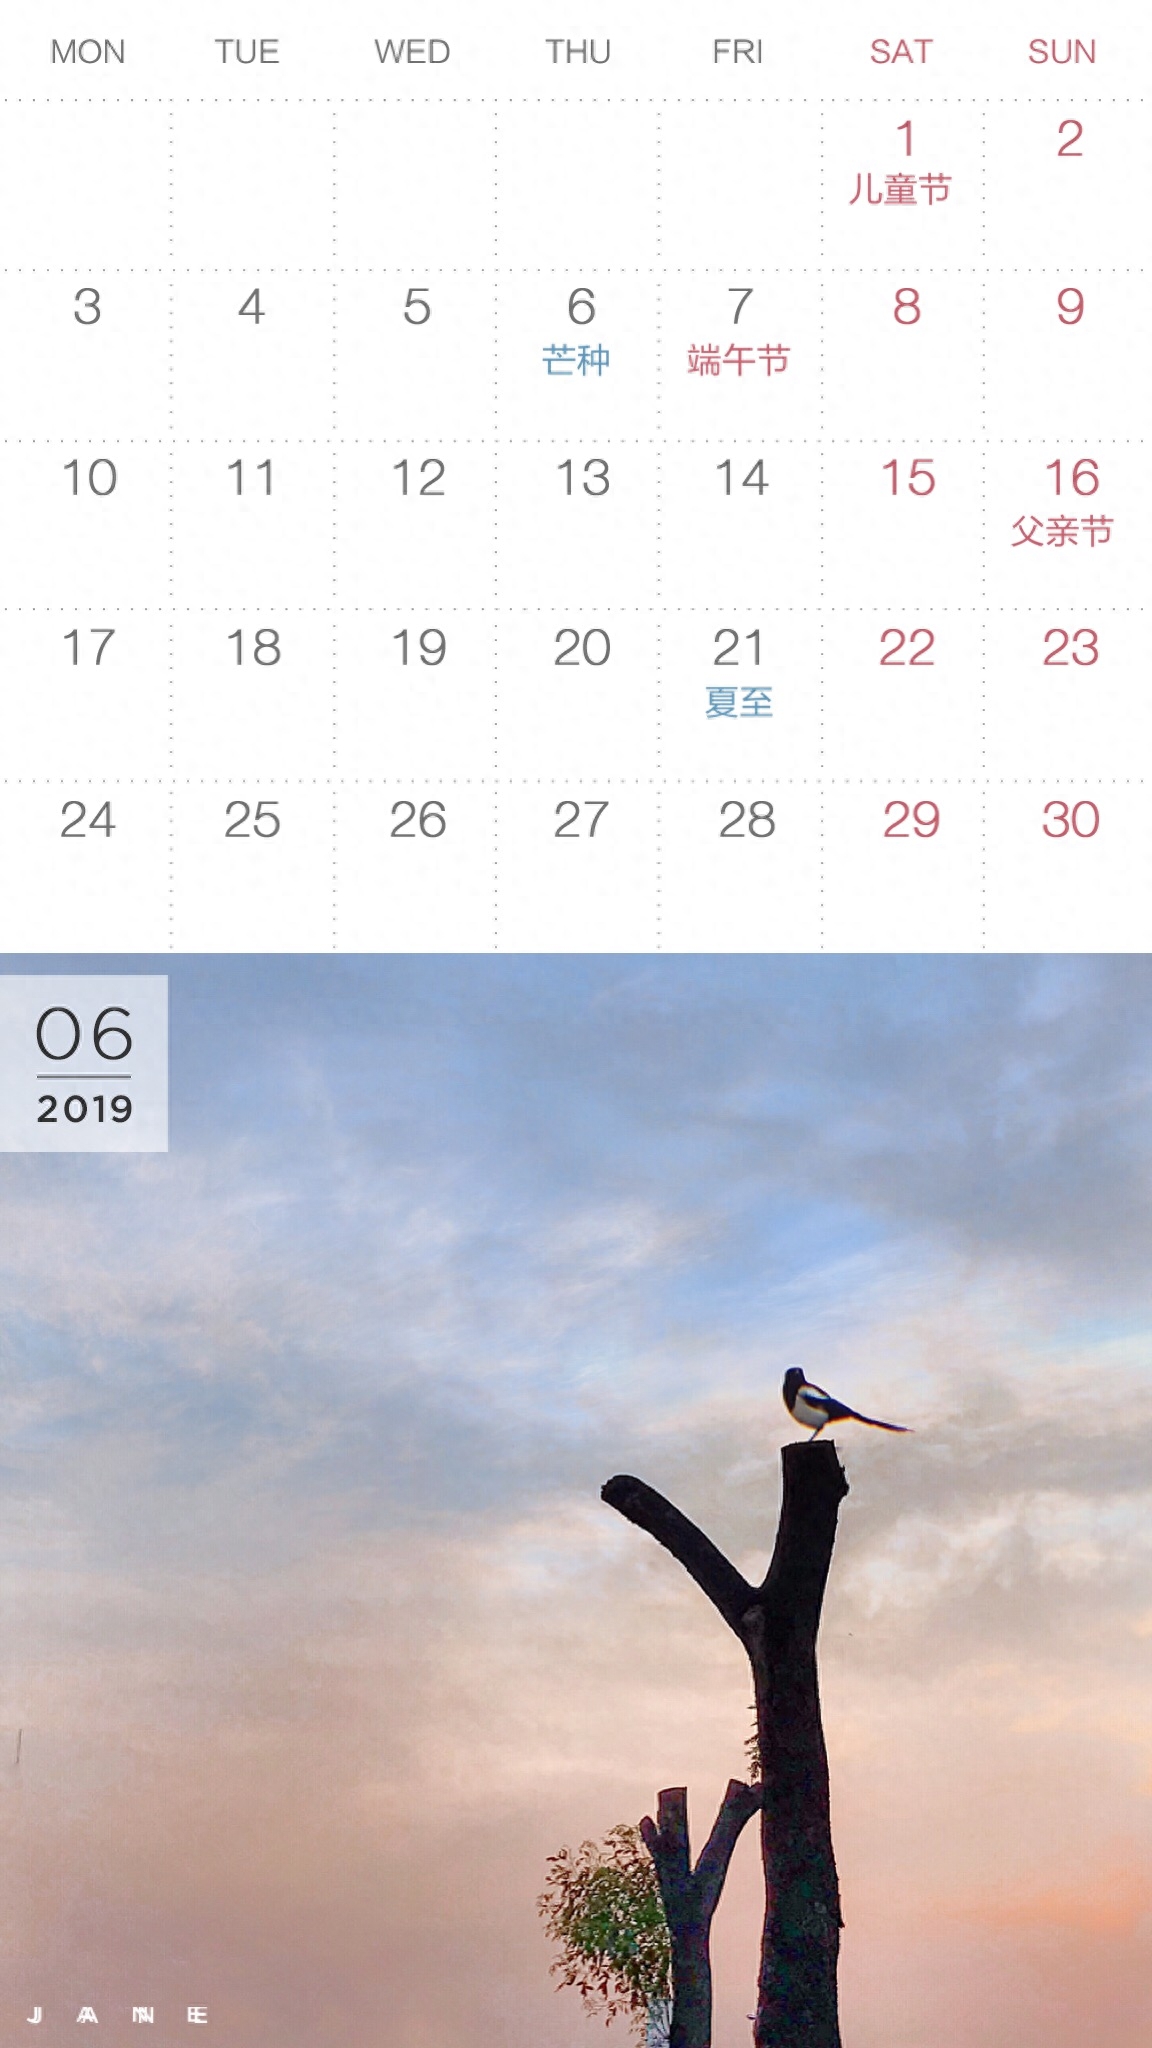 In June, I’ll give you 15 “Mobile Calendar Wallpapers” | Show you the “Healing Sky”!